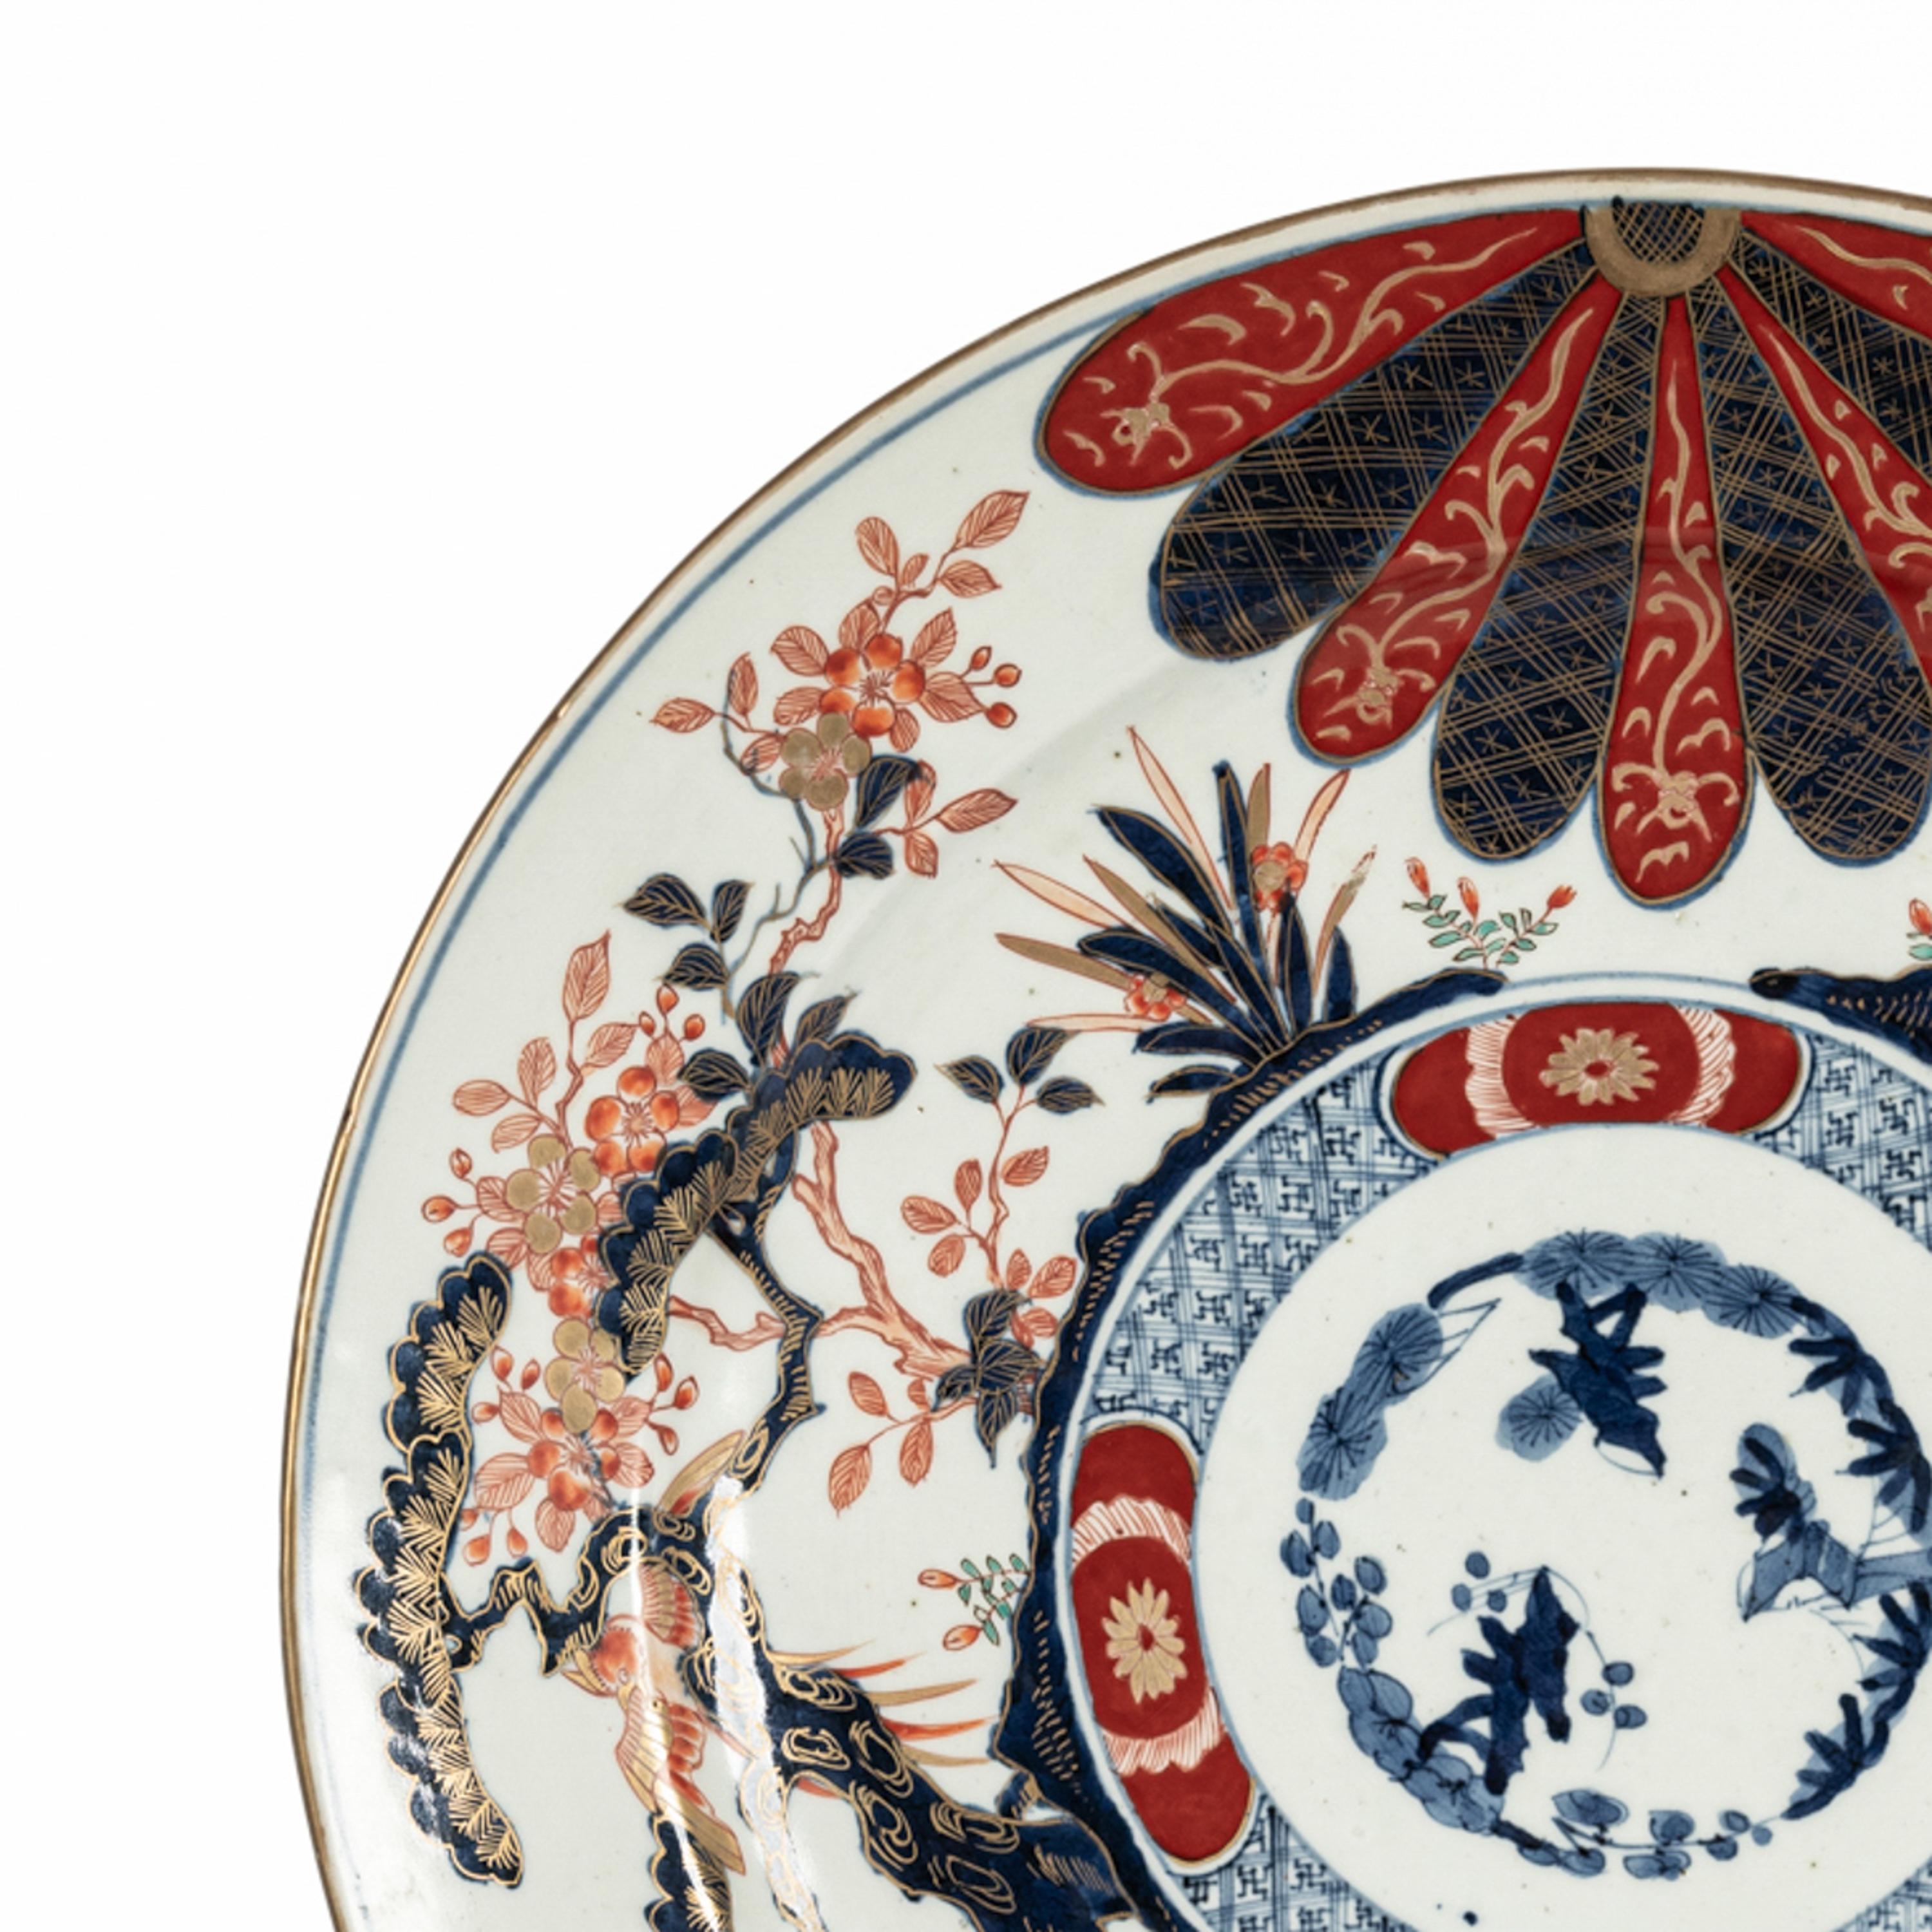 Monumental Antique Japanese Meiji Period Imari Porcelain Charger Plate 1880 For Sale 3